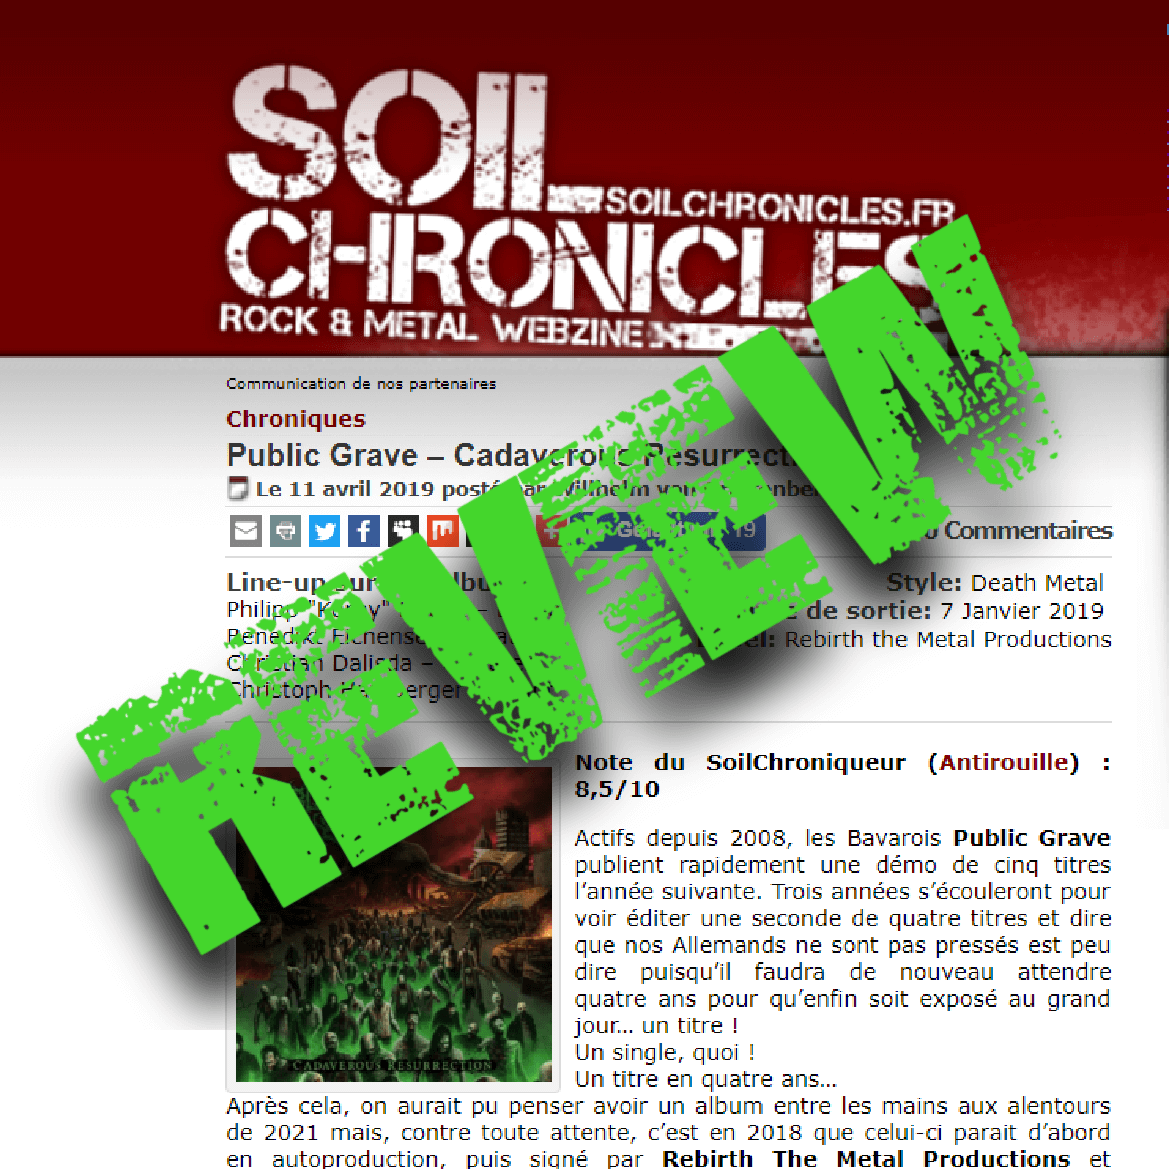 8.5 out of 10 – Review by Soil Chronicles